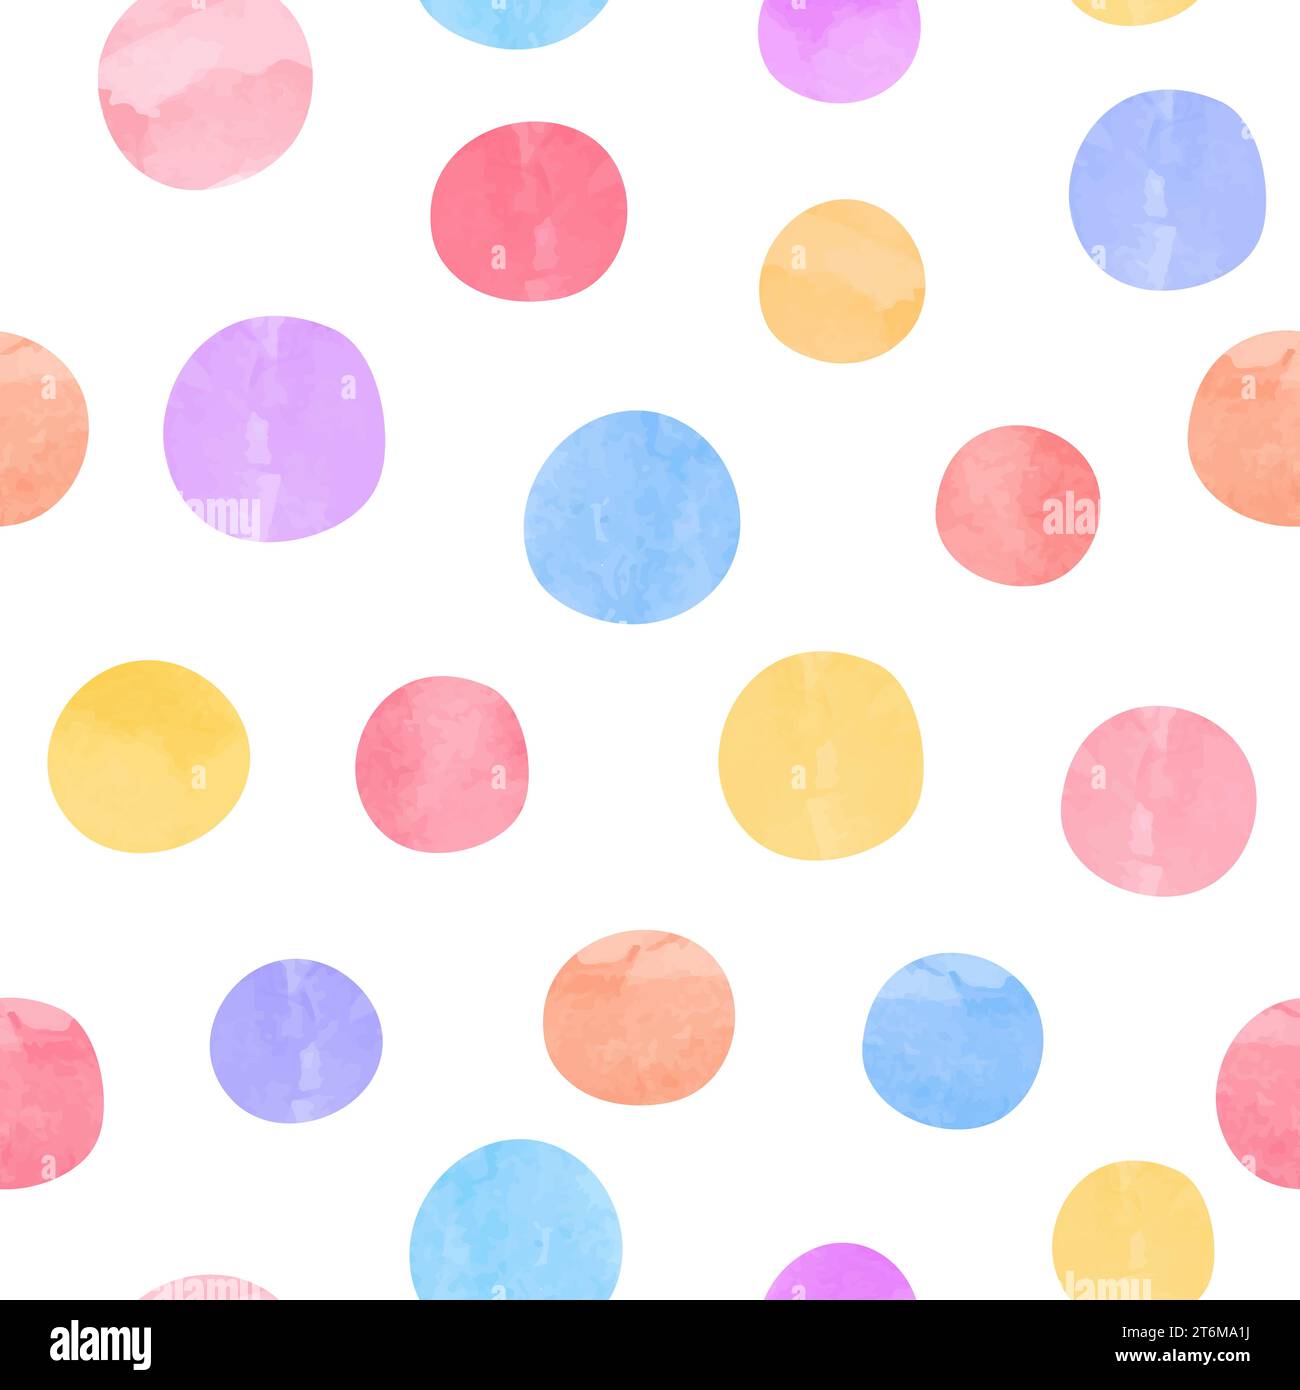 Colorful circles pattern. Vector seamless polka dot background with round watercolor shapes Stock Vector